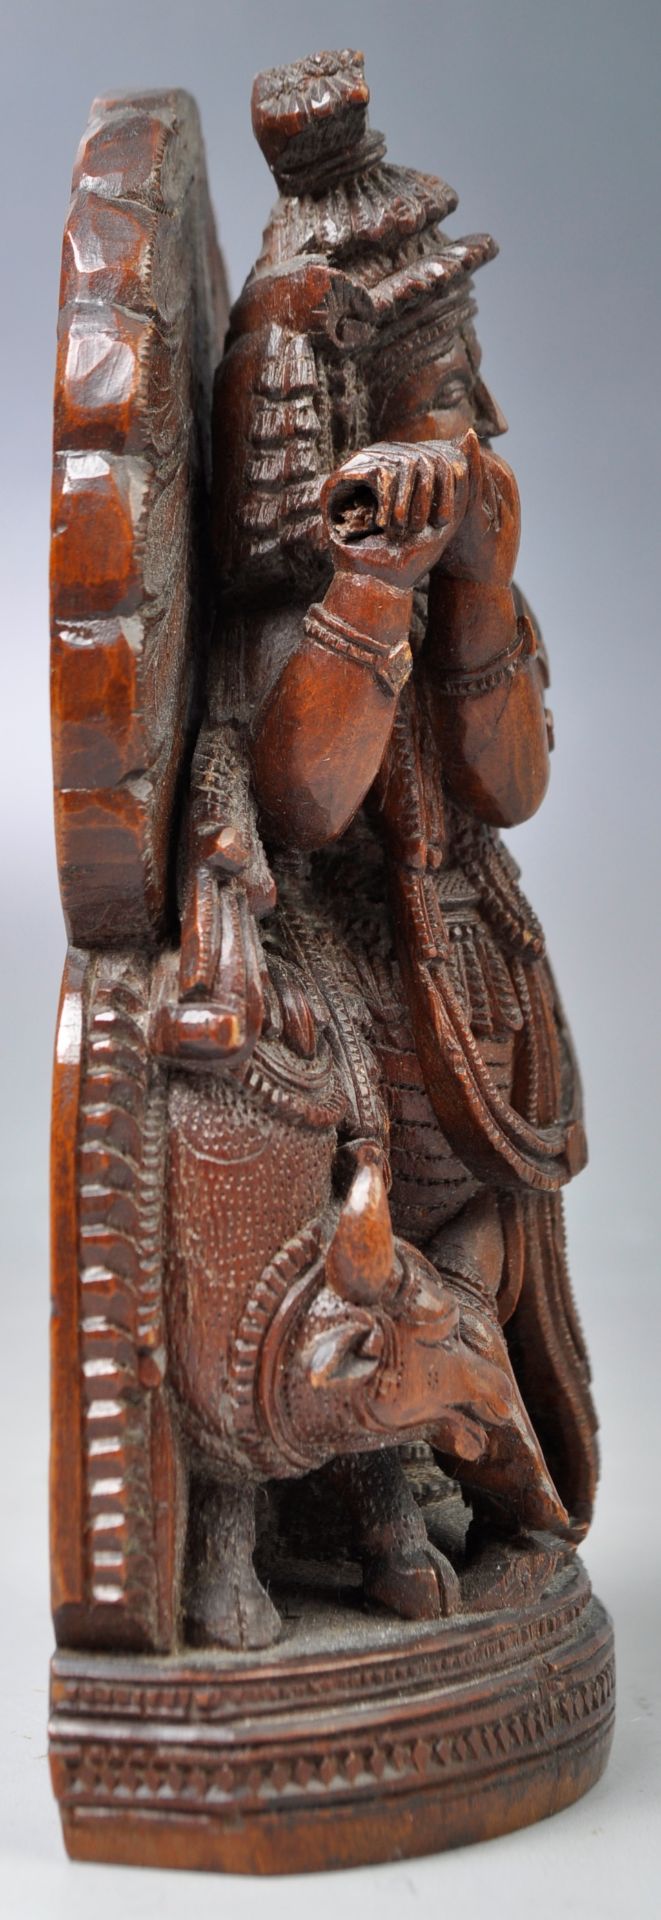 19TH CENTURY CARVED INDIAN FIGURINE OF KRISHNA AN COW - Image 2 of 5